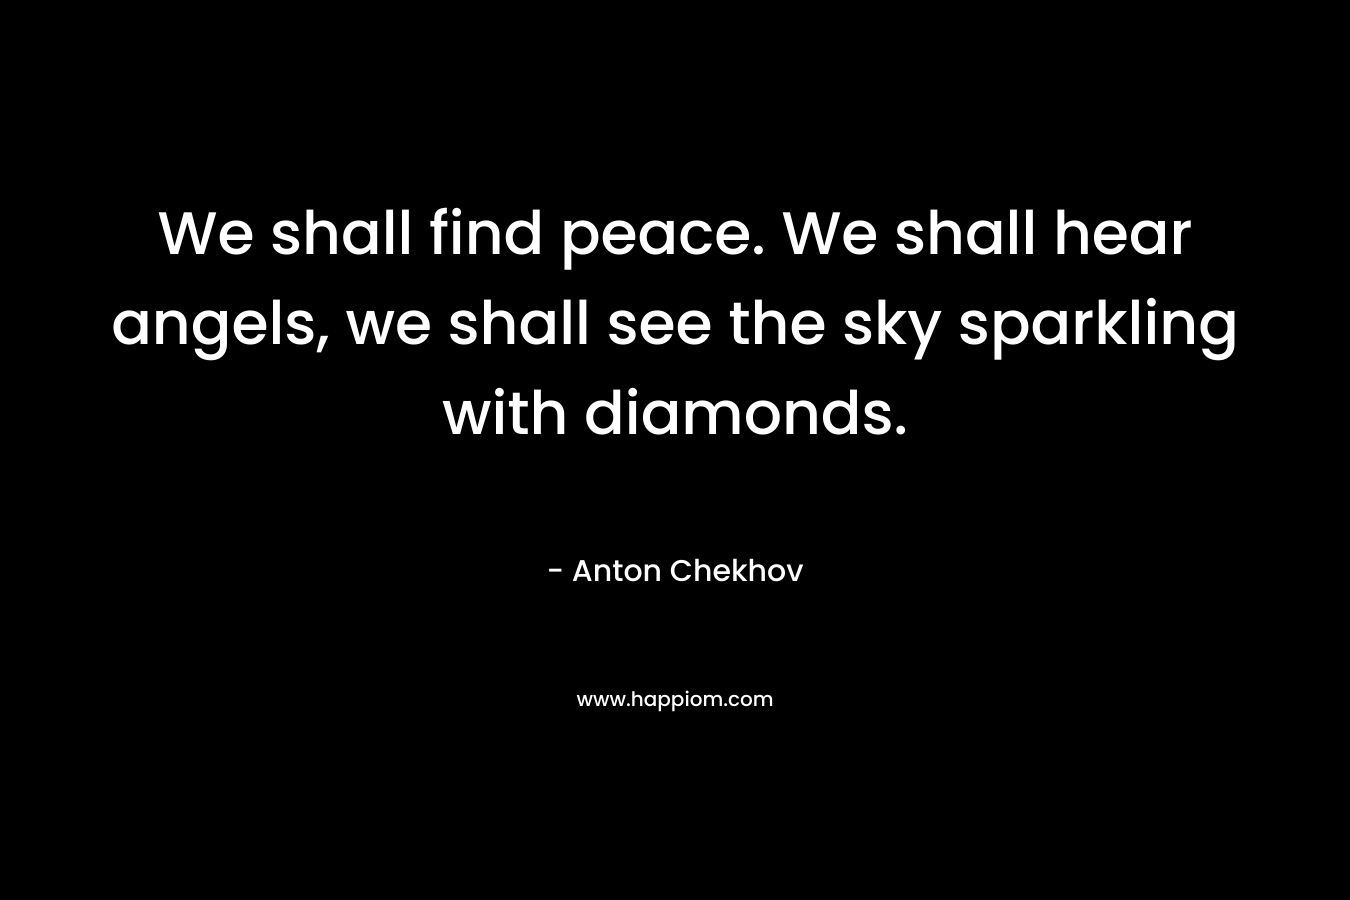 We shall find peace. We shall hear angels, we shall see the sky sparkling with diamonds.